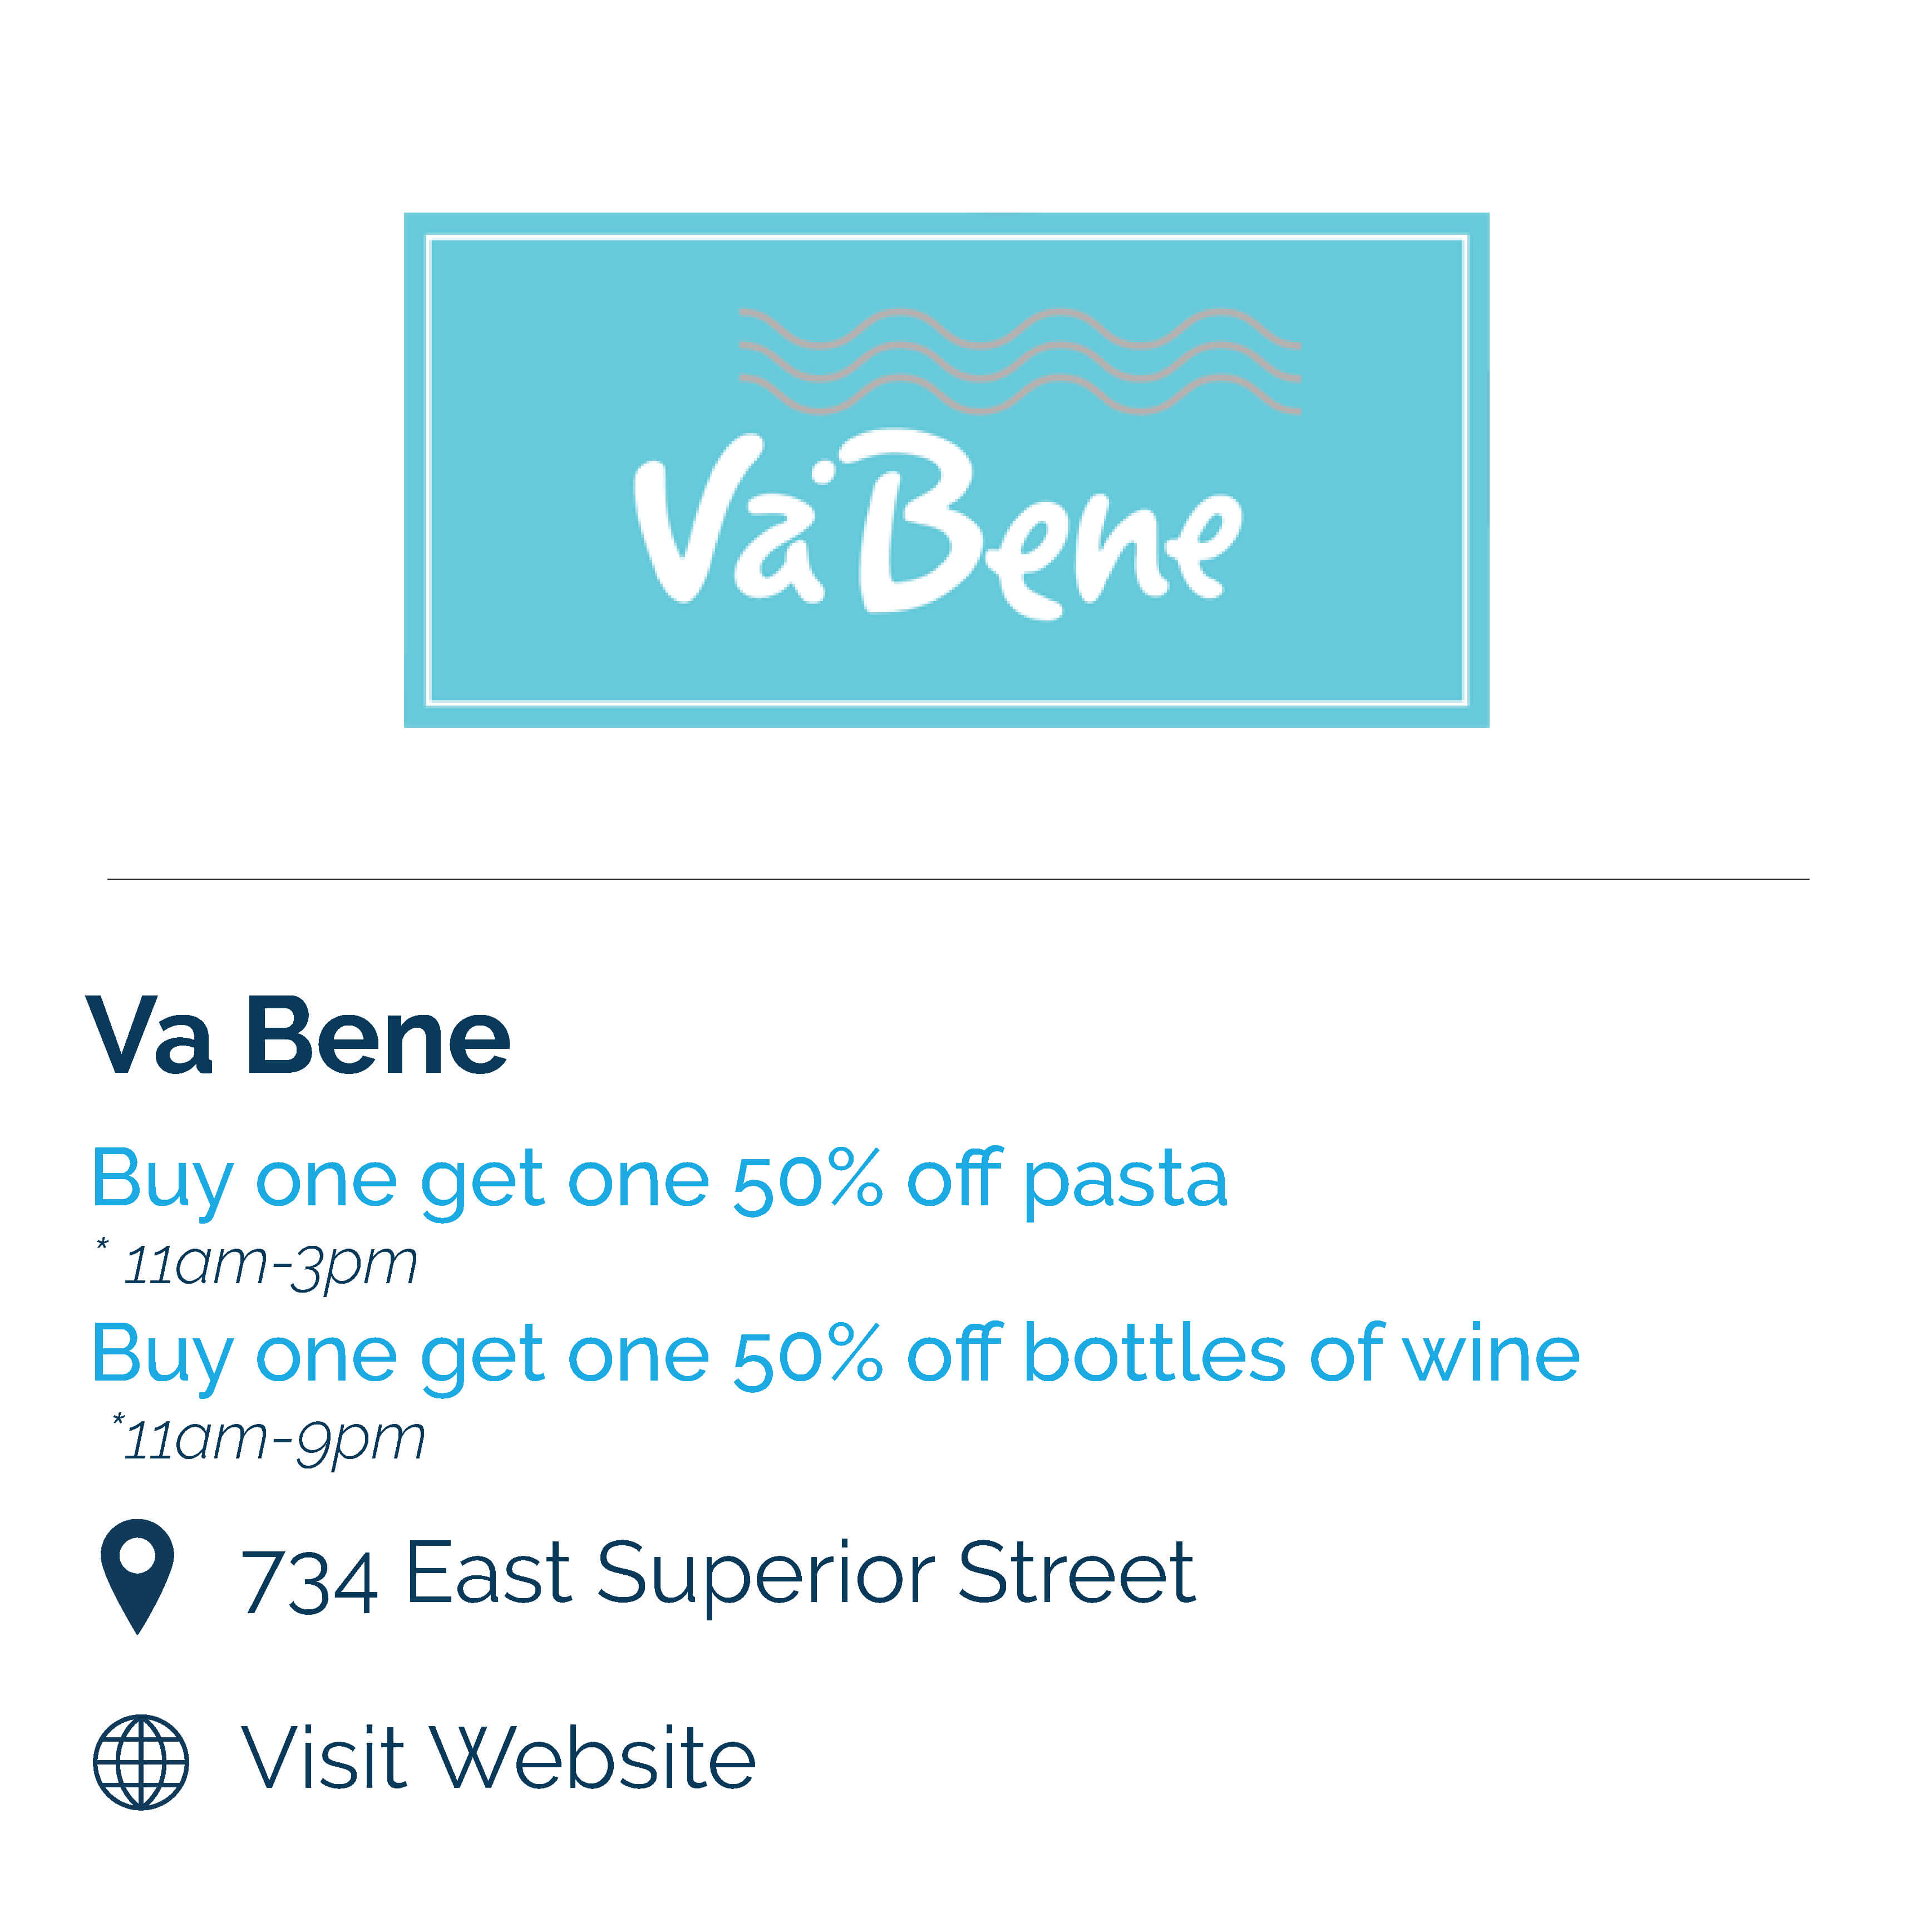 va bene. buy one get one 50% off pasta 11am-3pm, buy one get one 50% off bottles of wine 11am-9pm, 734 east superior street